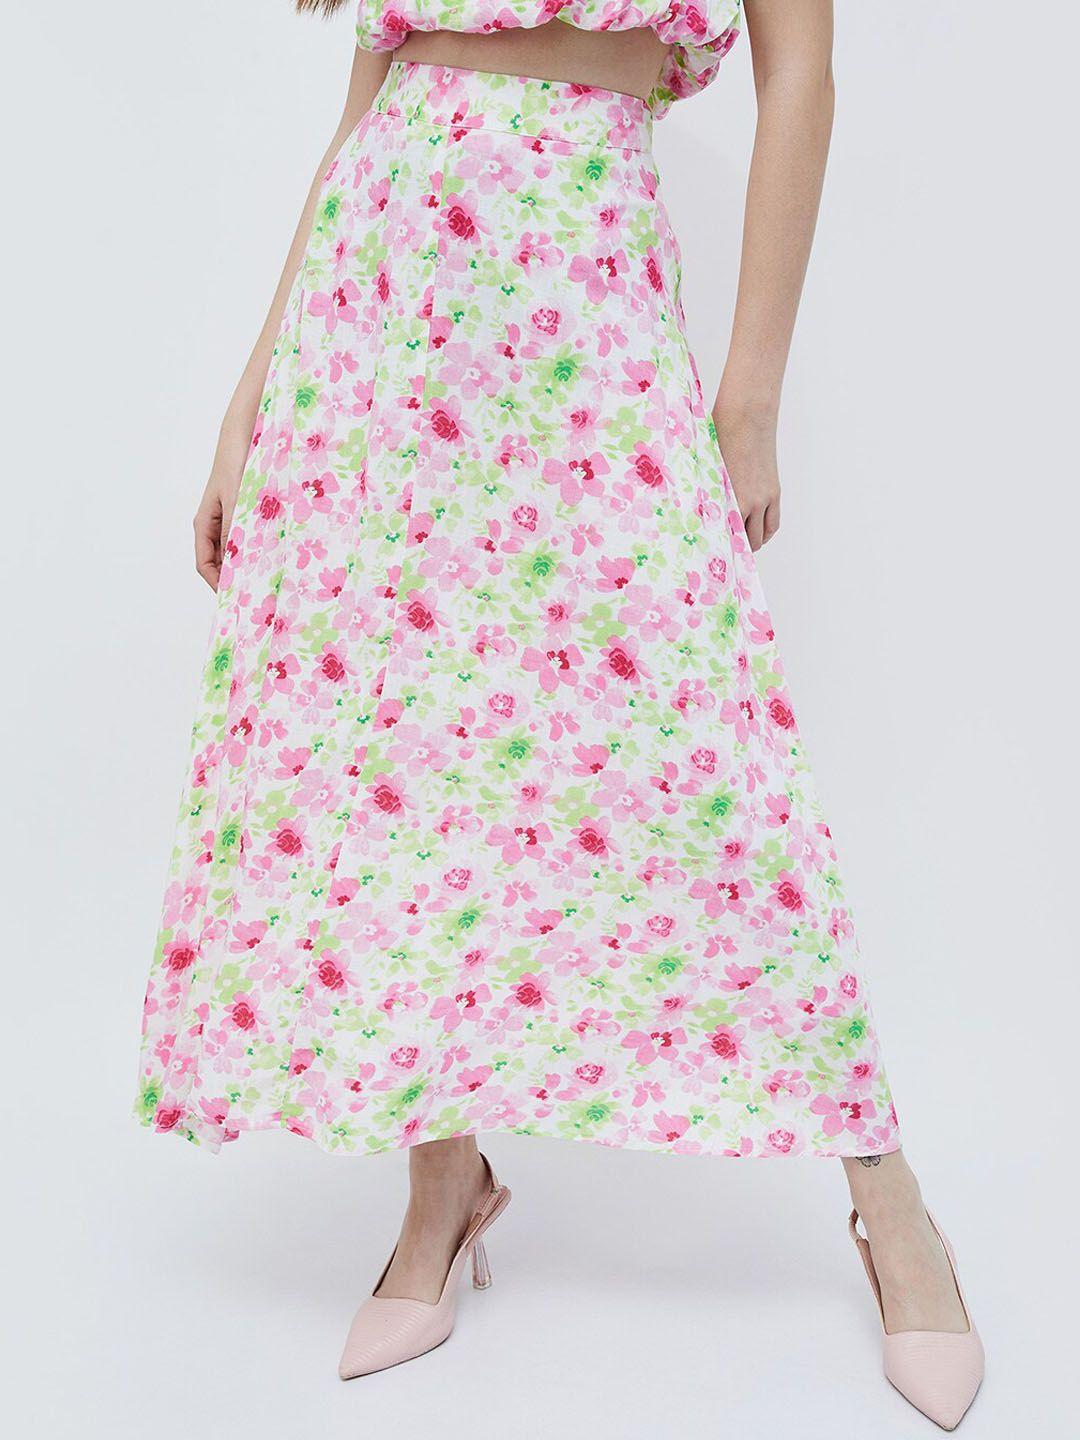 ginger-by-lifestyle-floral-printed-midi-flared-skirt